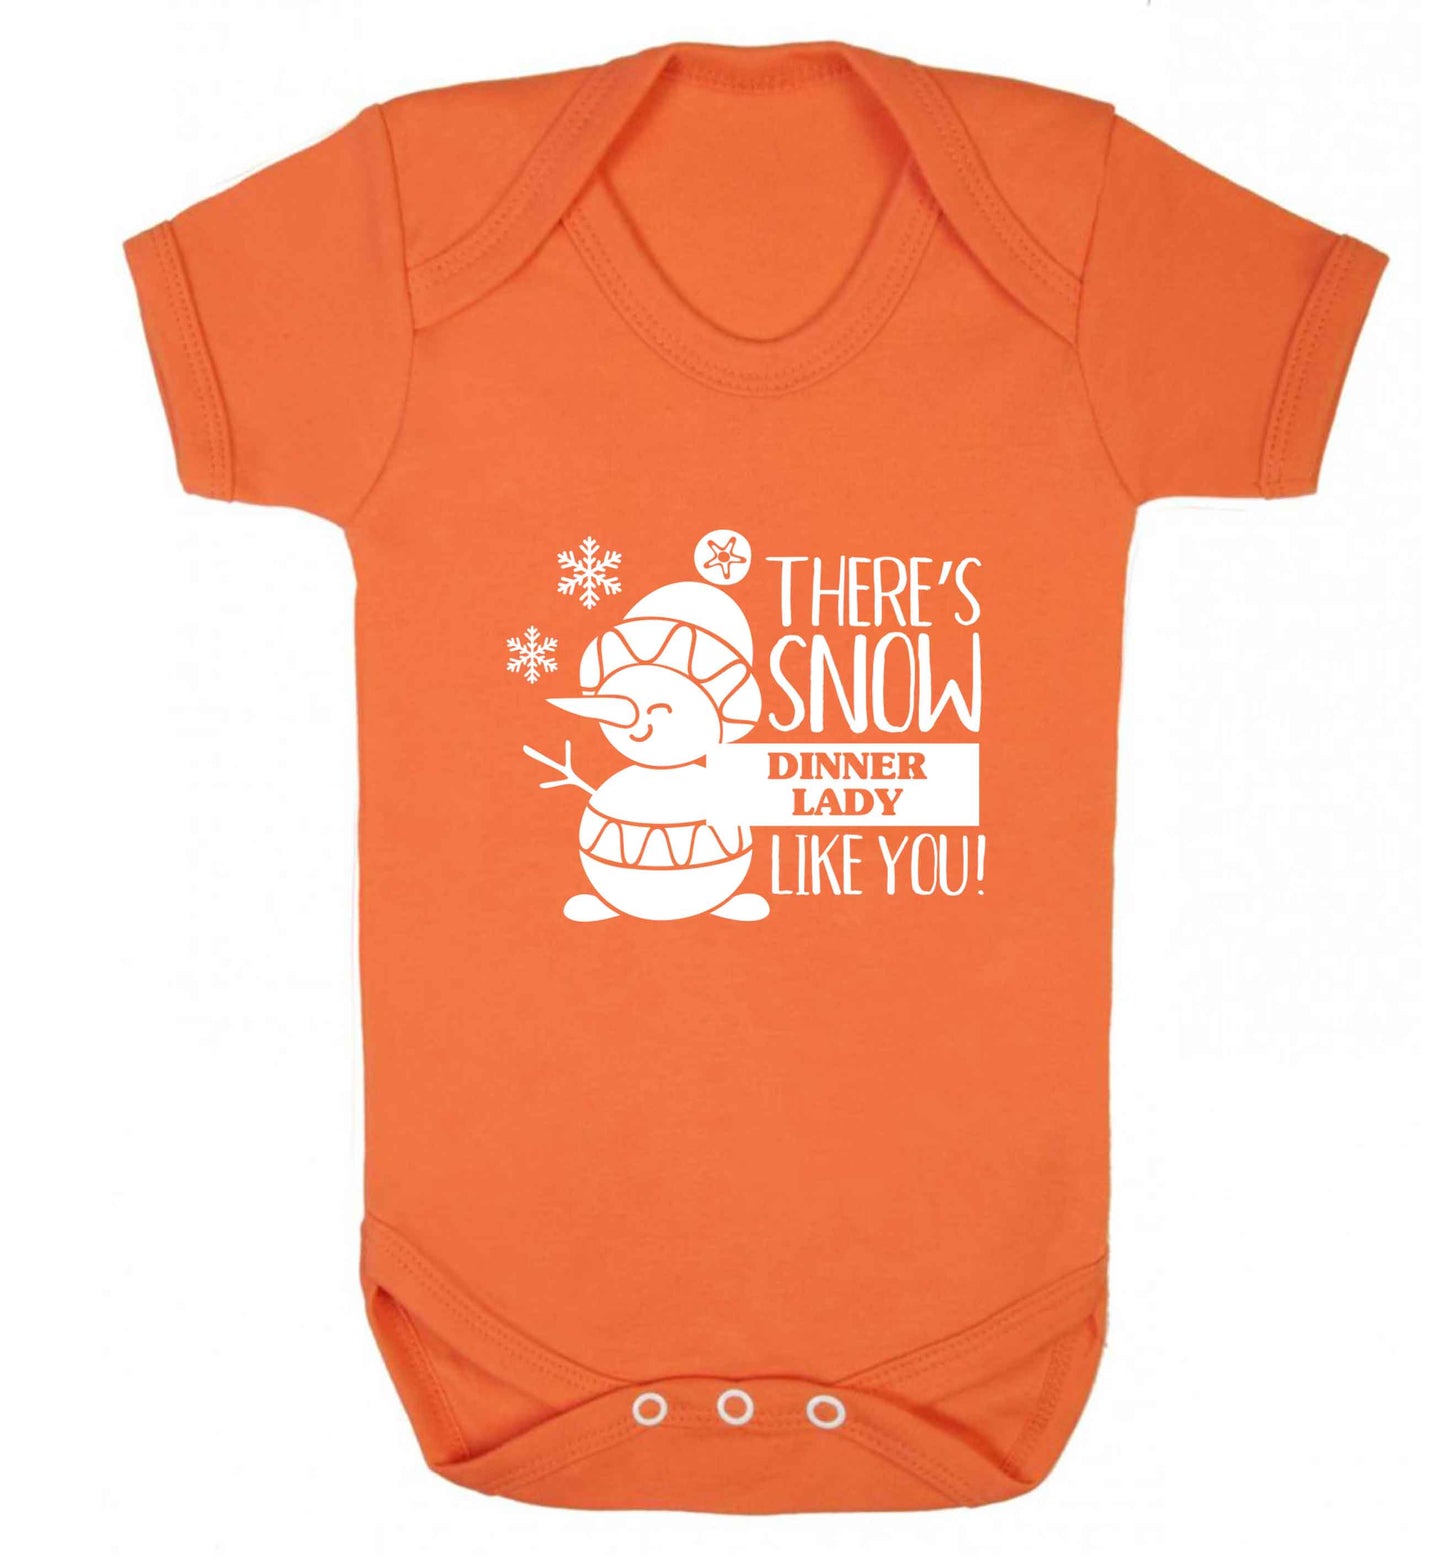 There's snow dinner lady like you baby vest orange 18-24 months